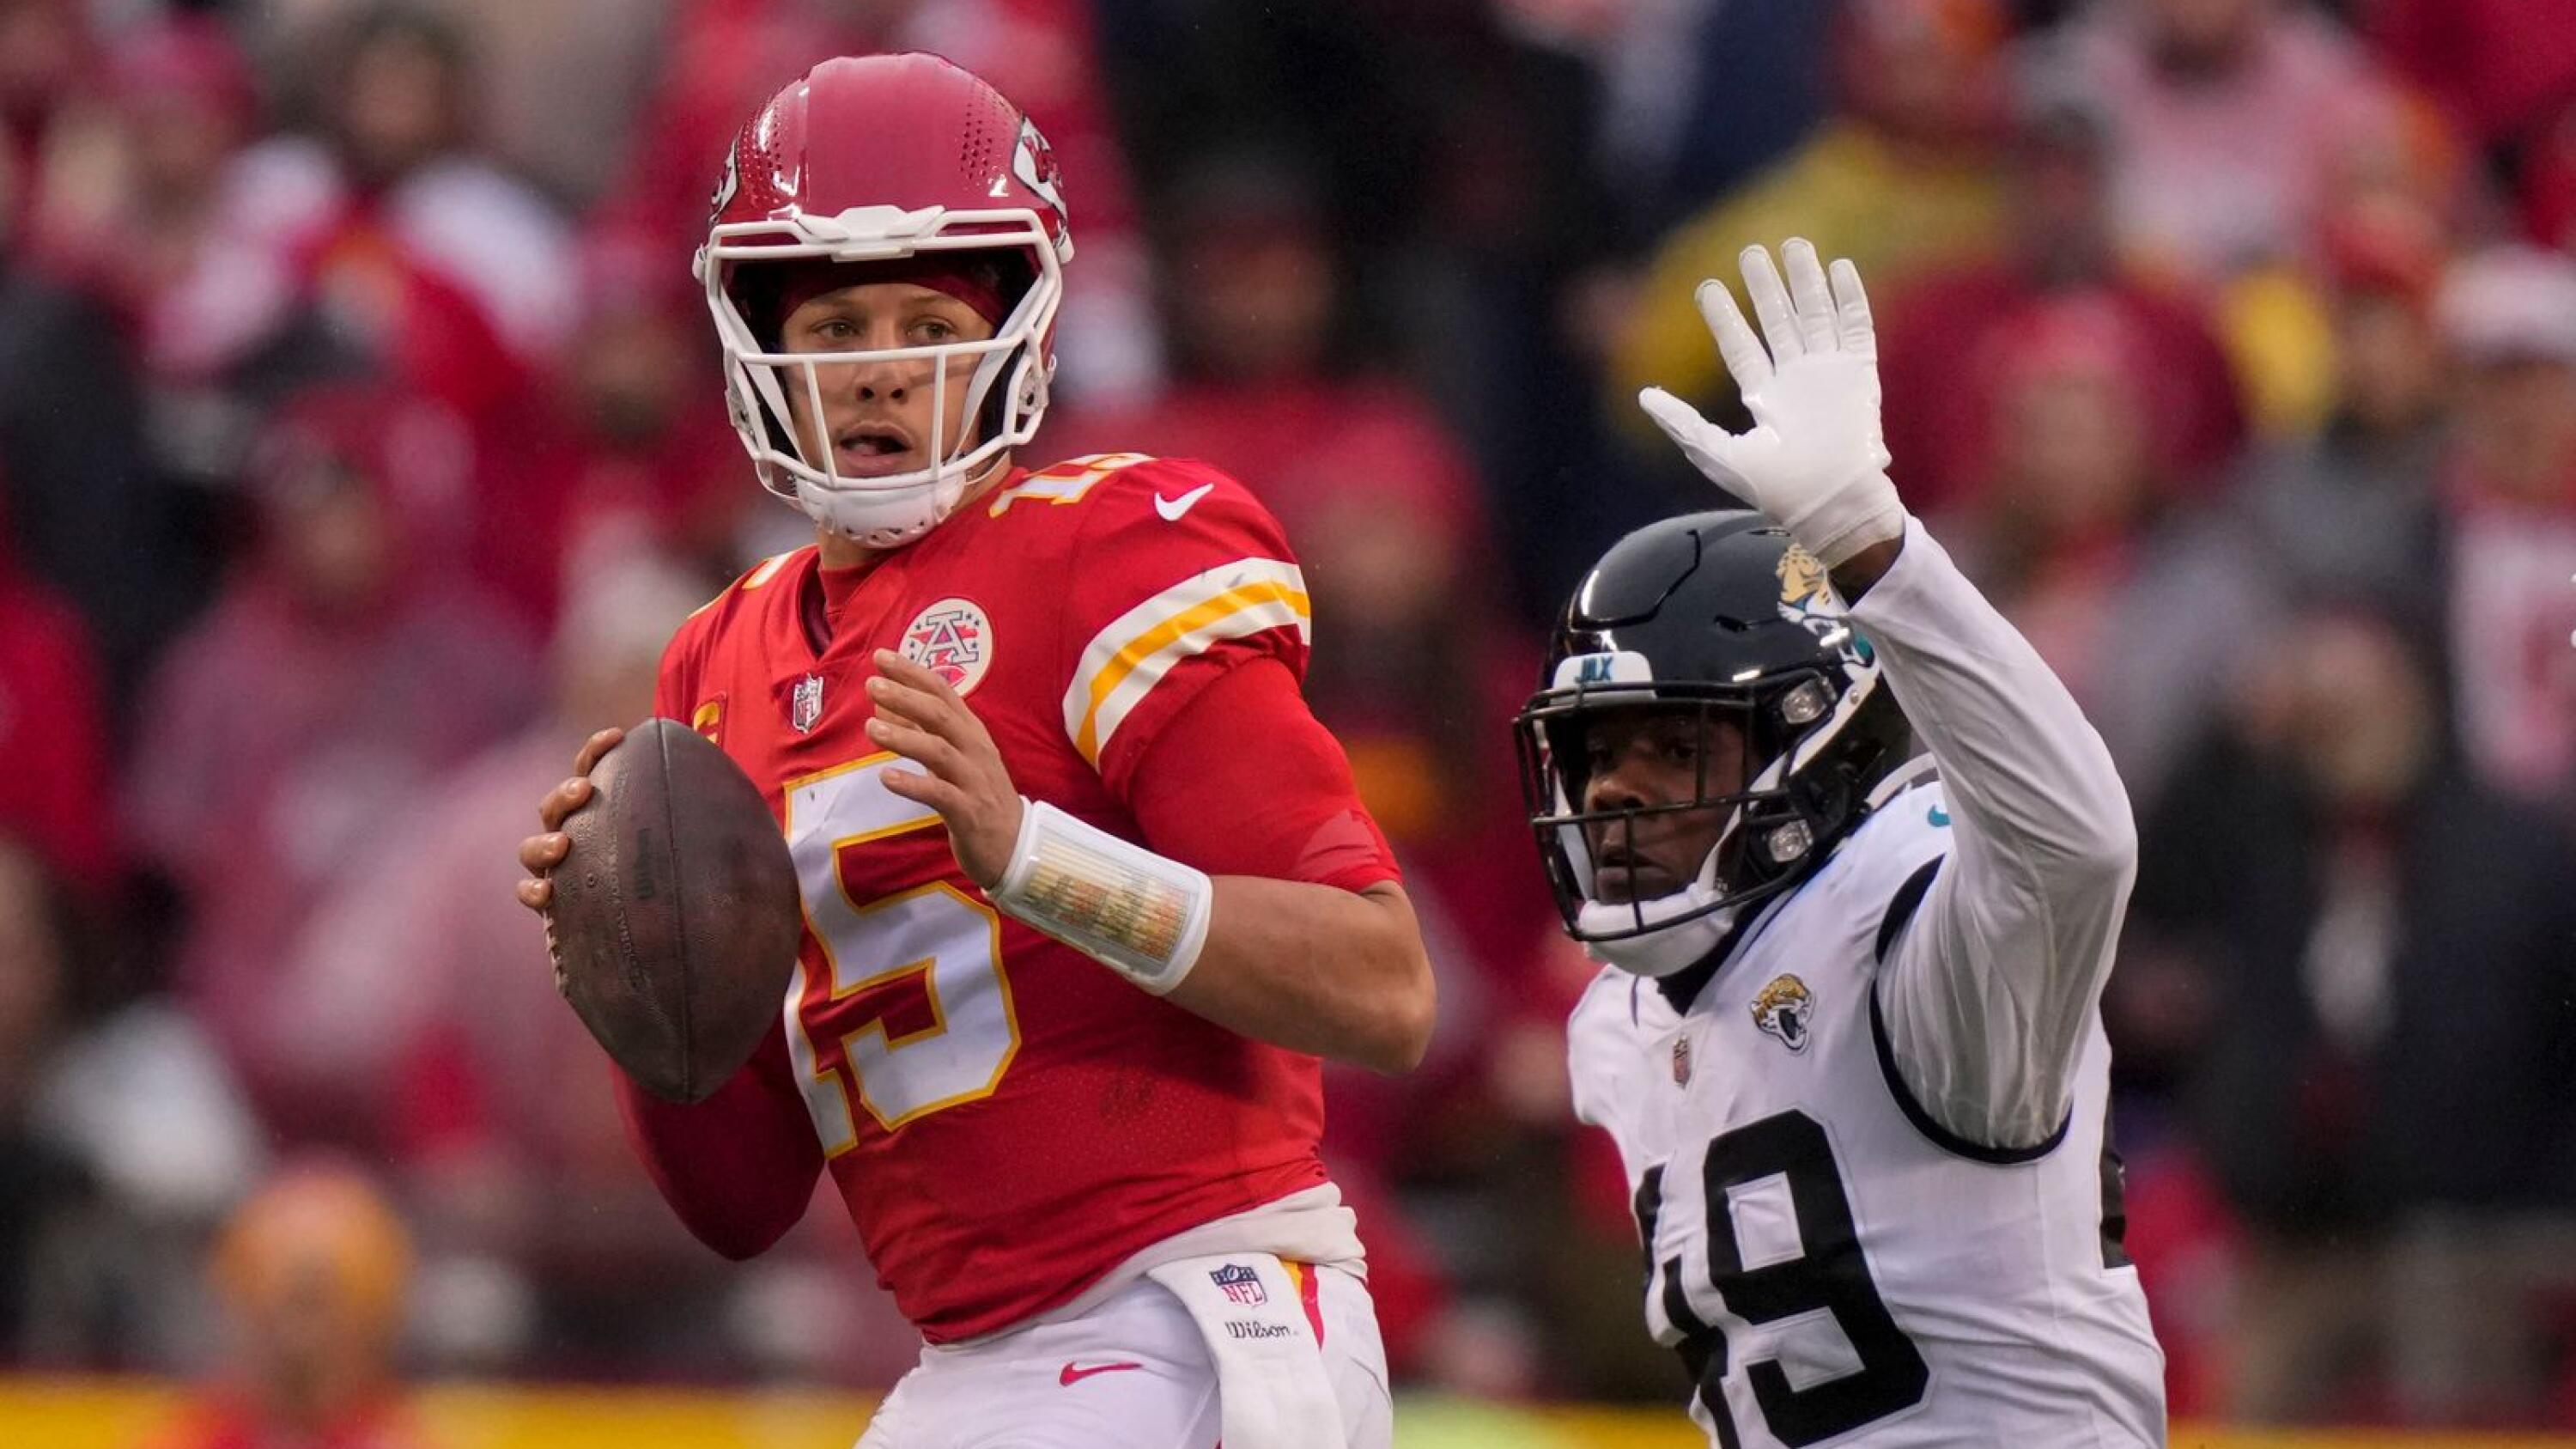 Chiefs, led by hobbled Mahomes, beat Jags 27-20 in playoffs